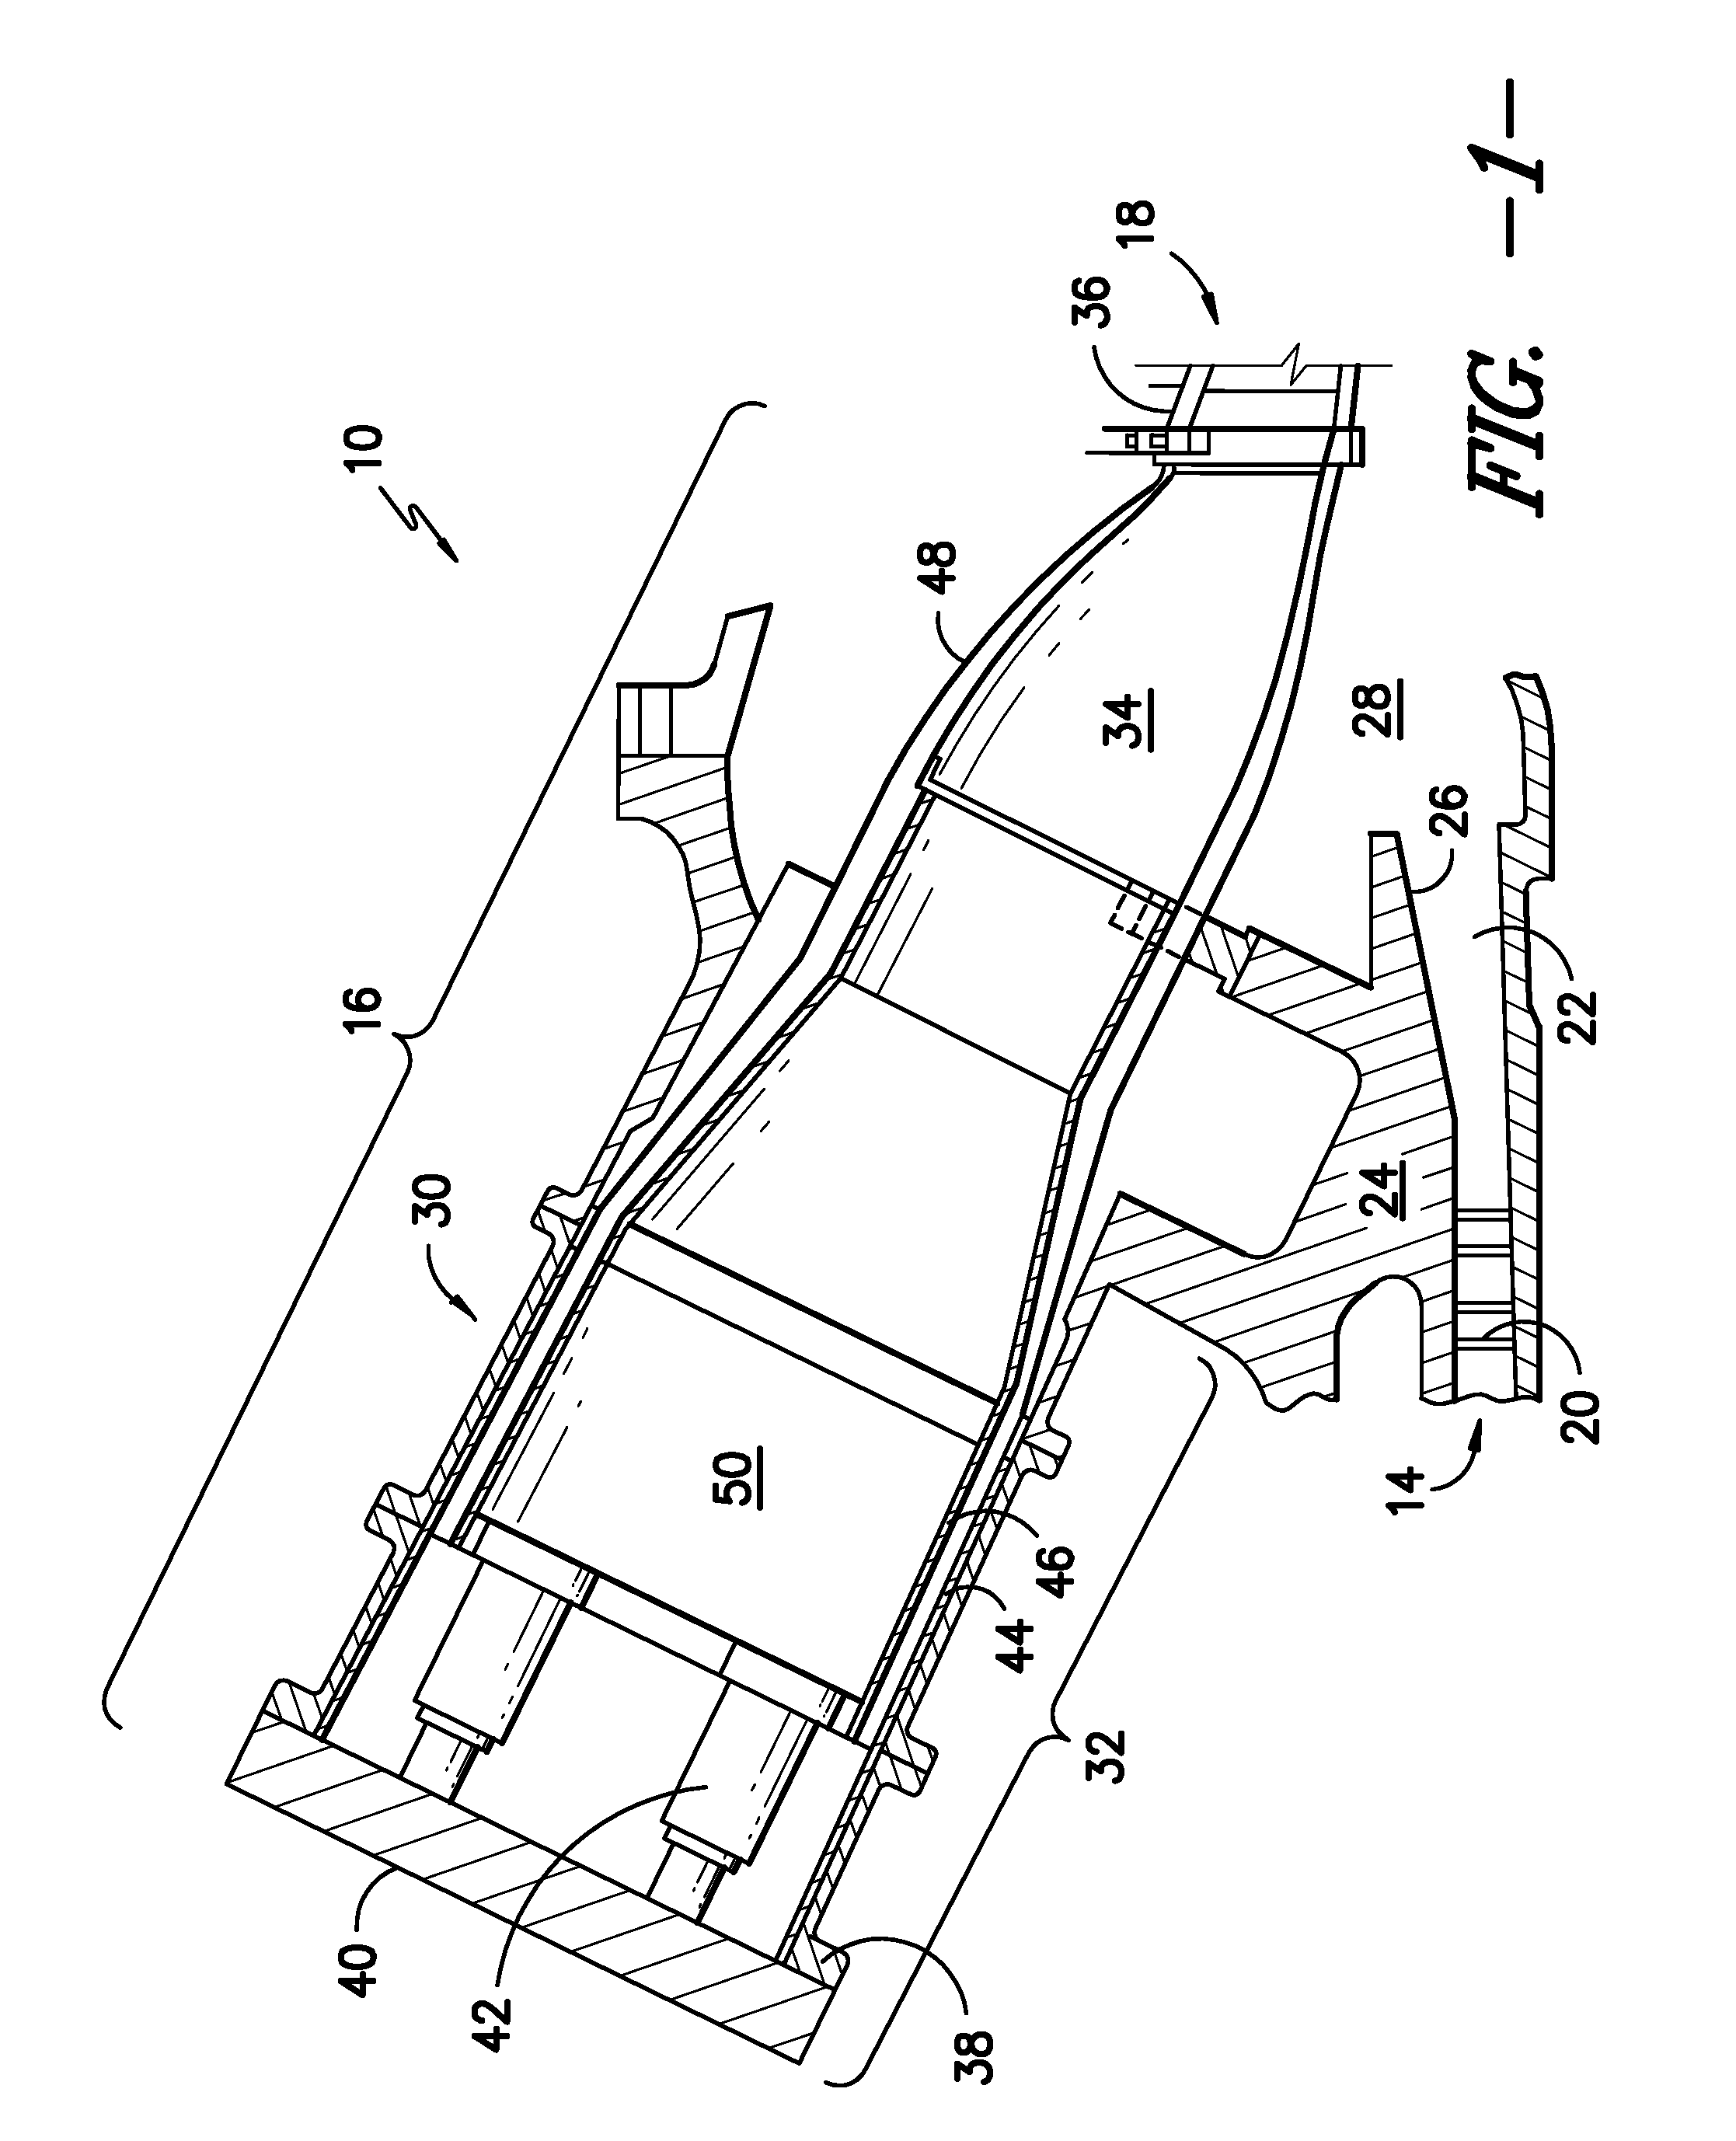 Bled diffuser fed secondary combustion system for gas turbines